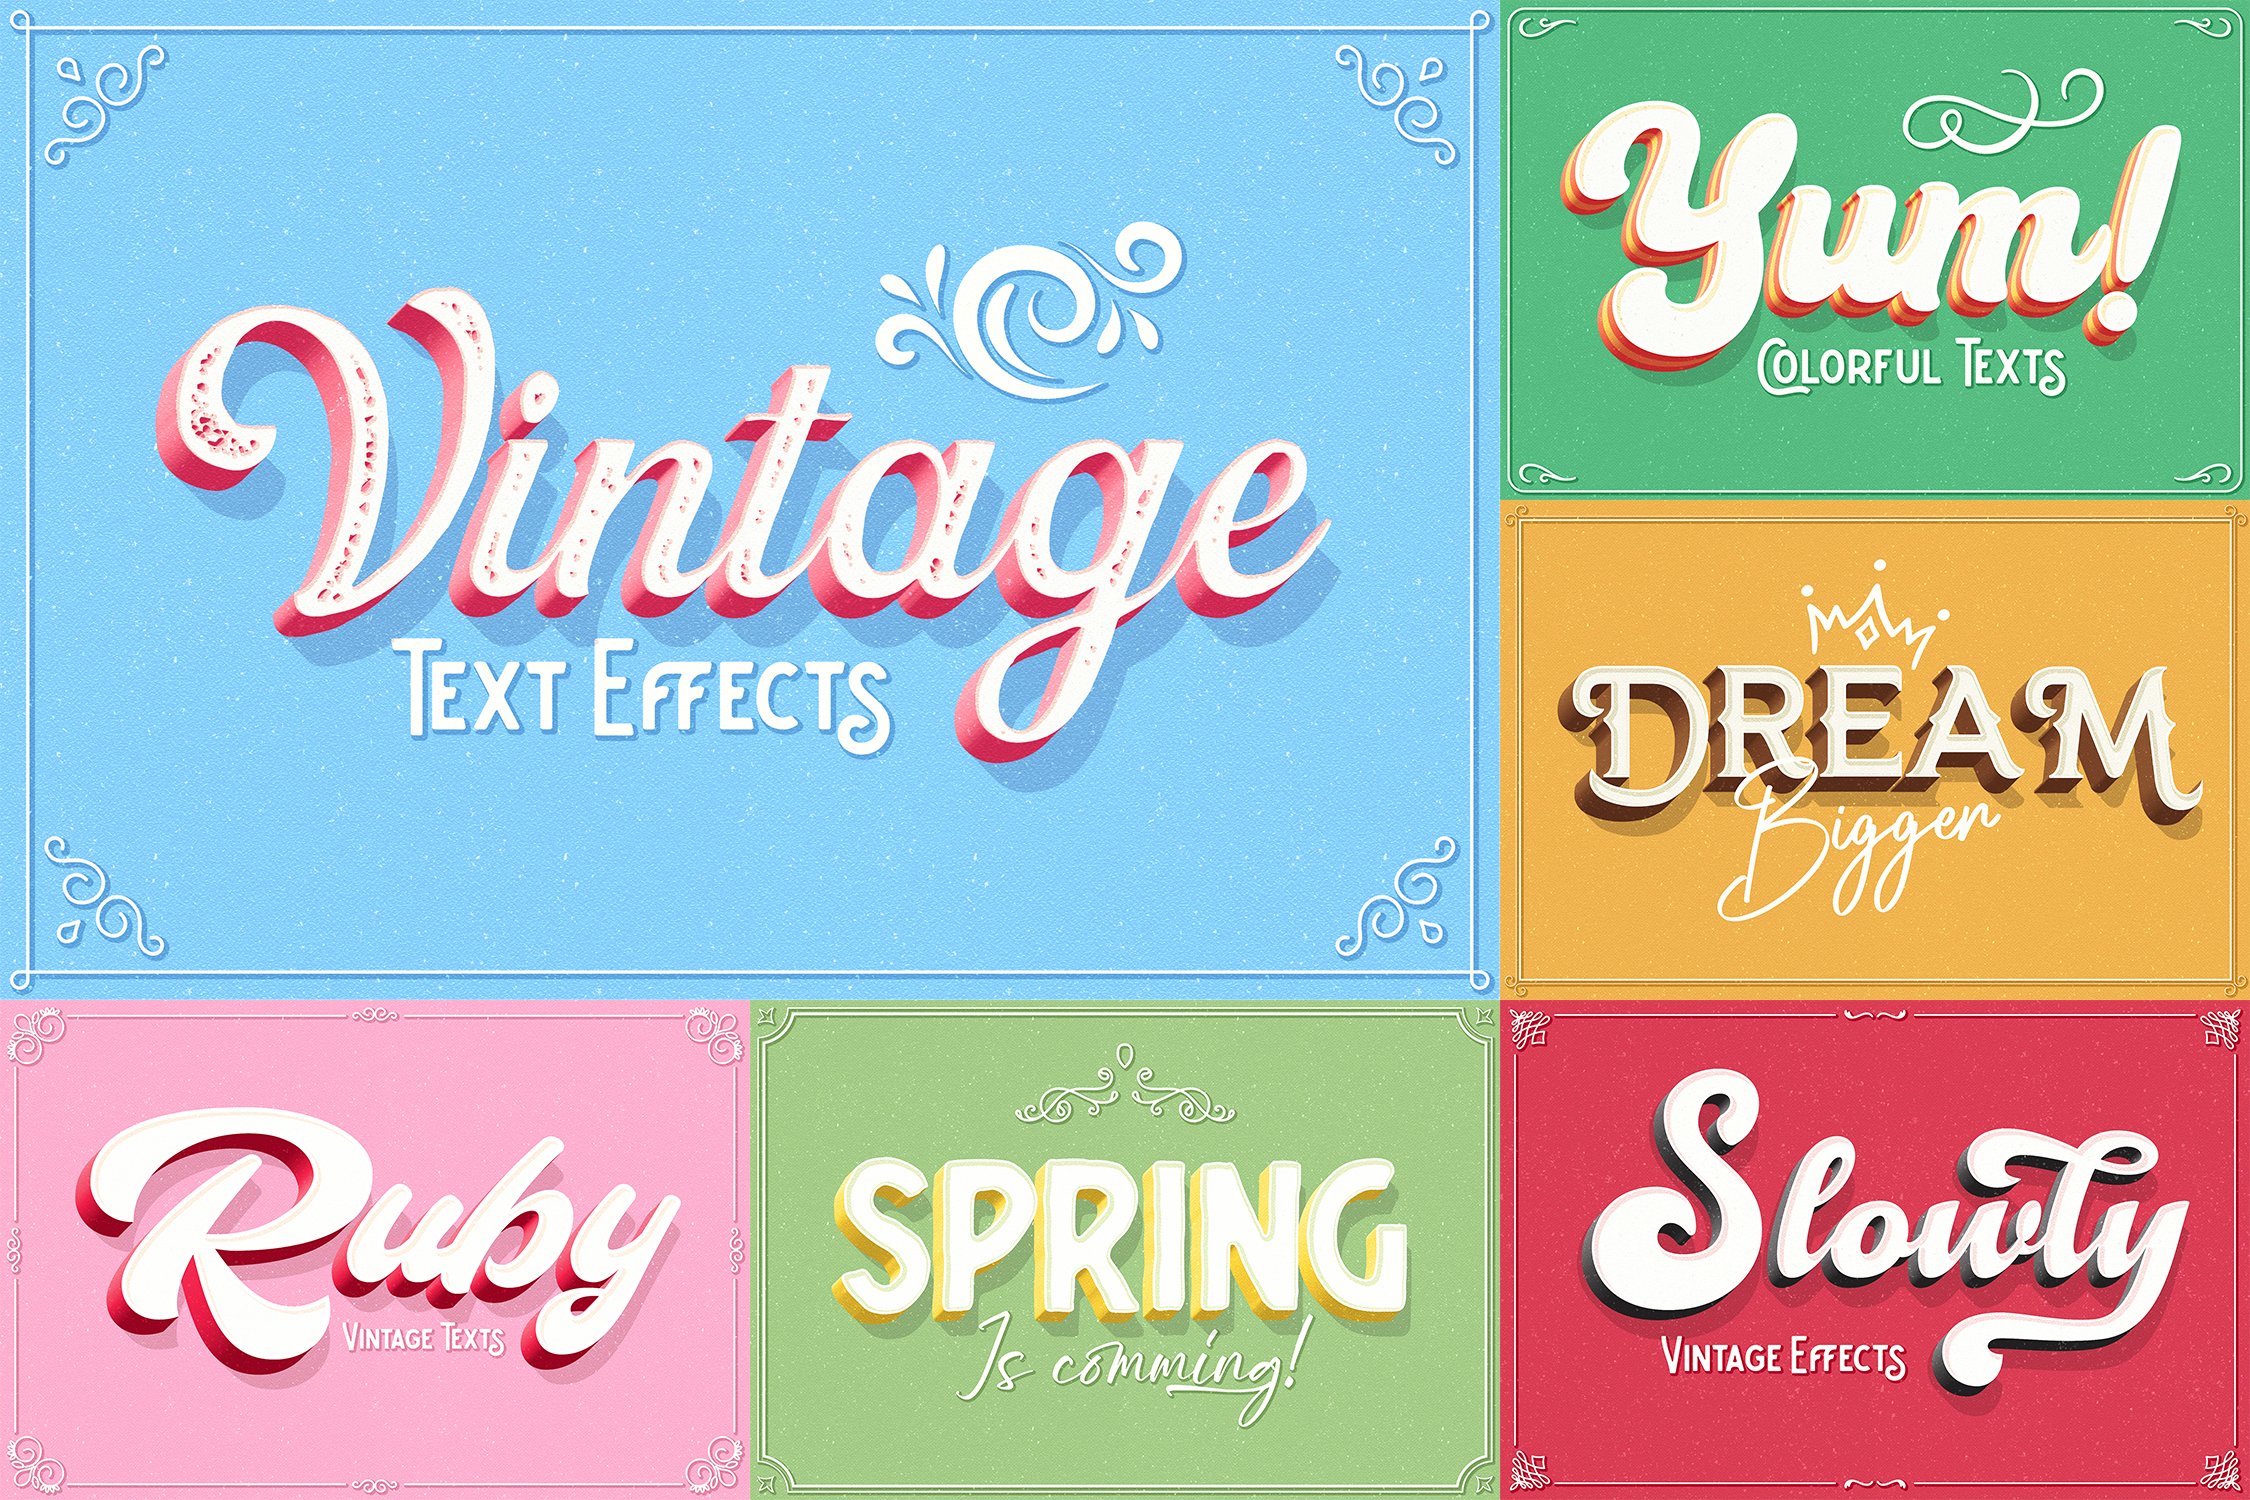 Vintage Text Effectscover image.